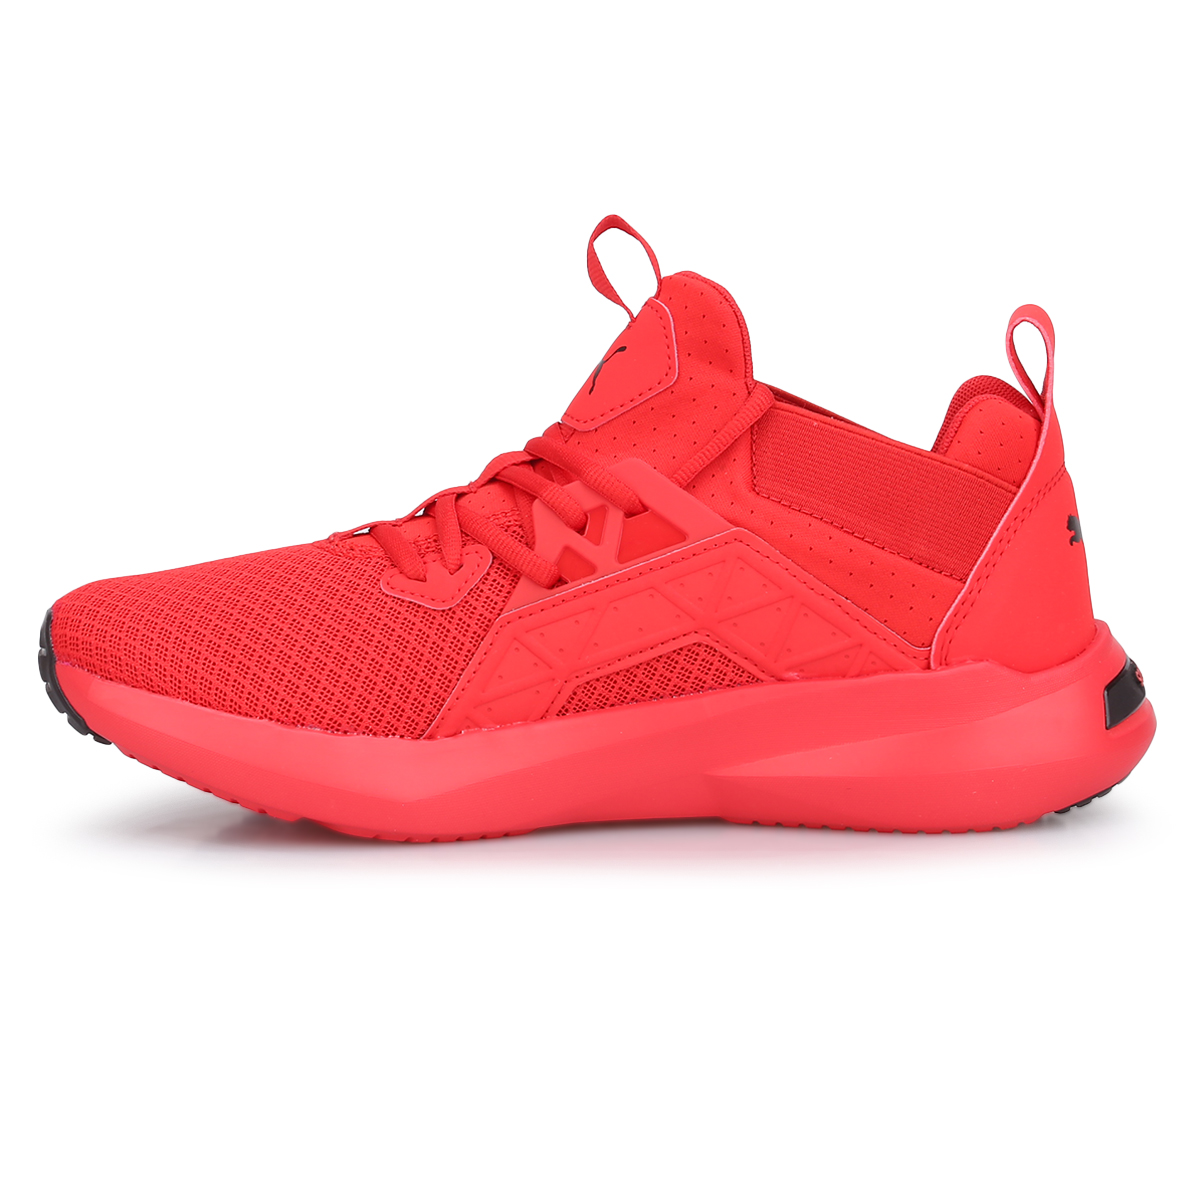 Zapatillas Puma Softride Enzo Nxt,  image number null